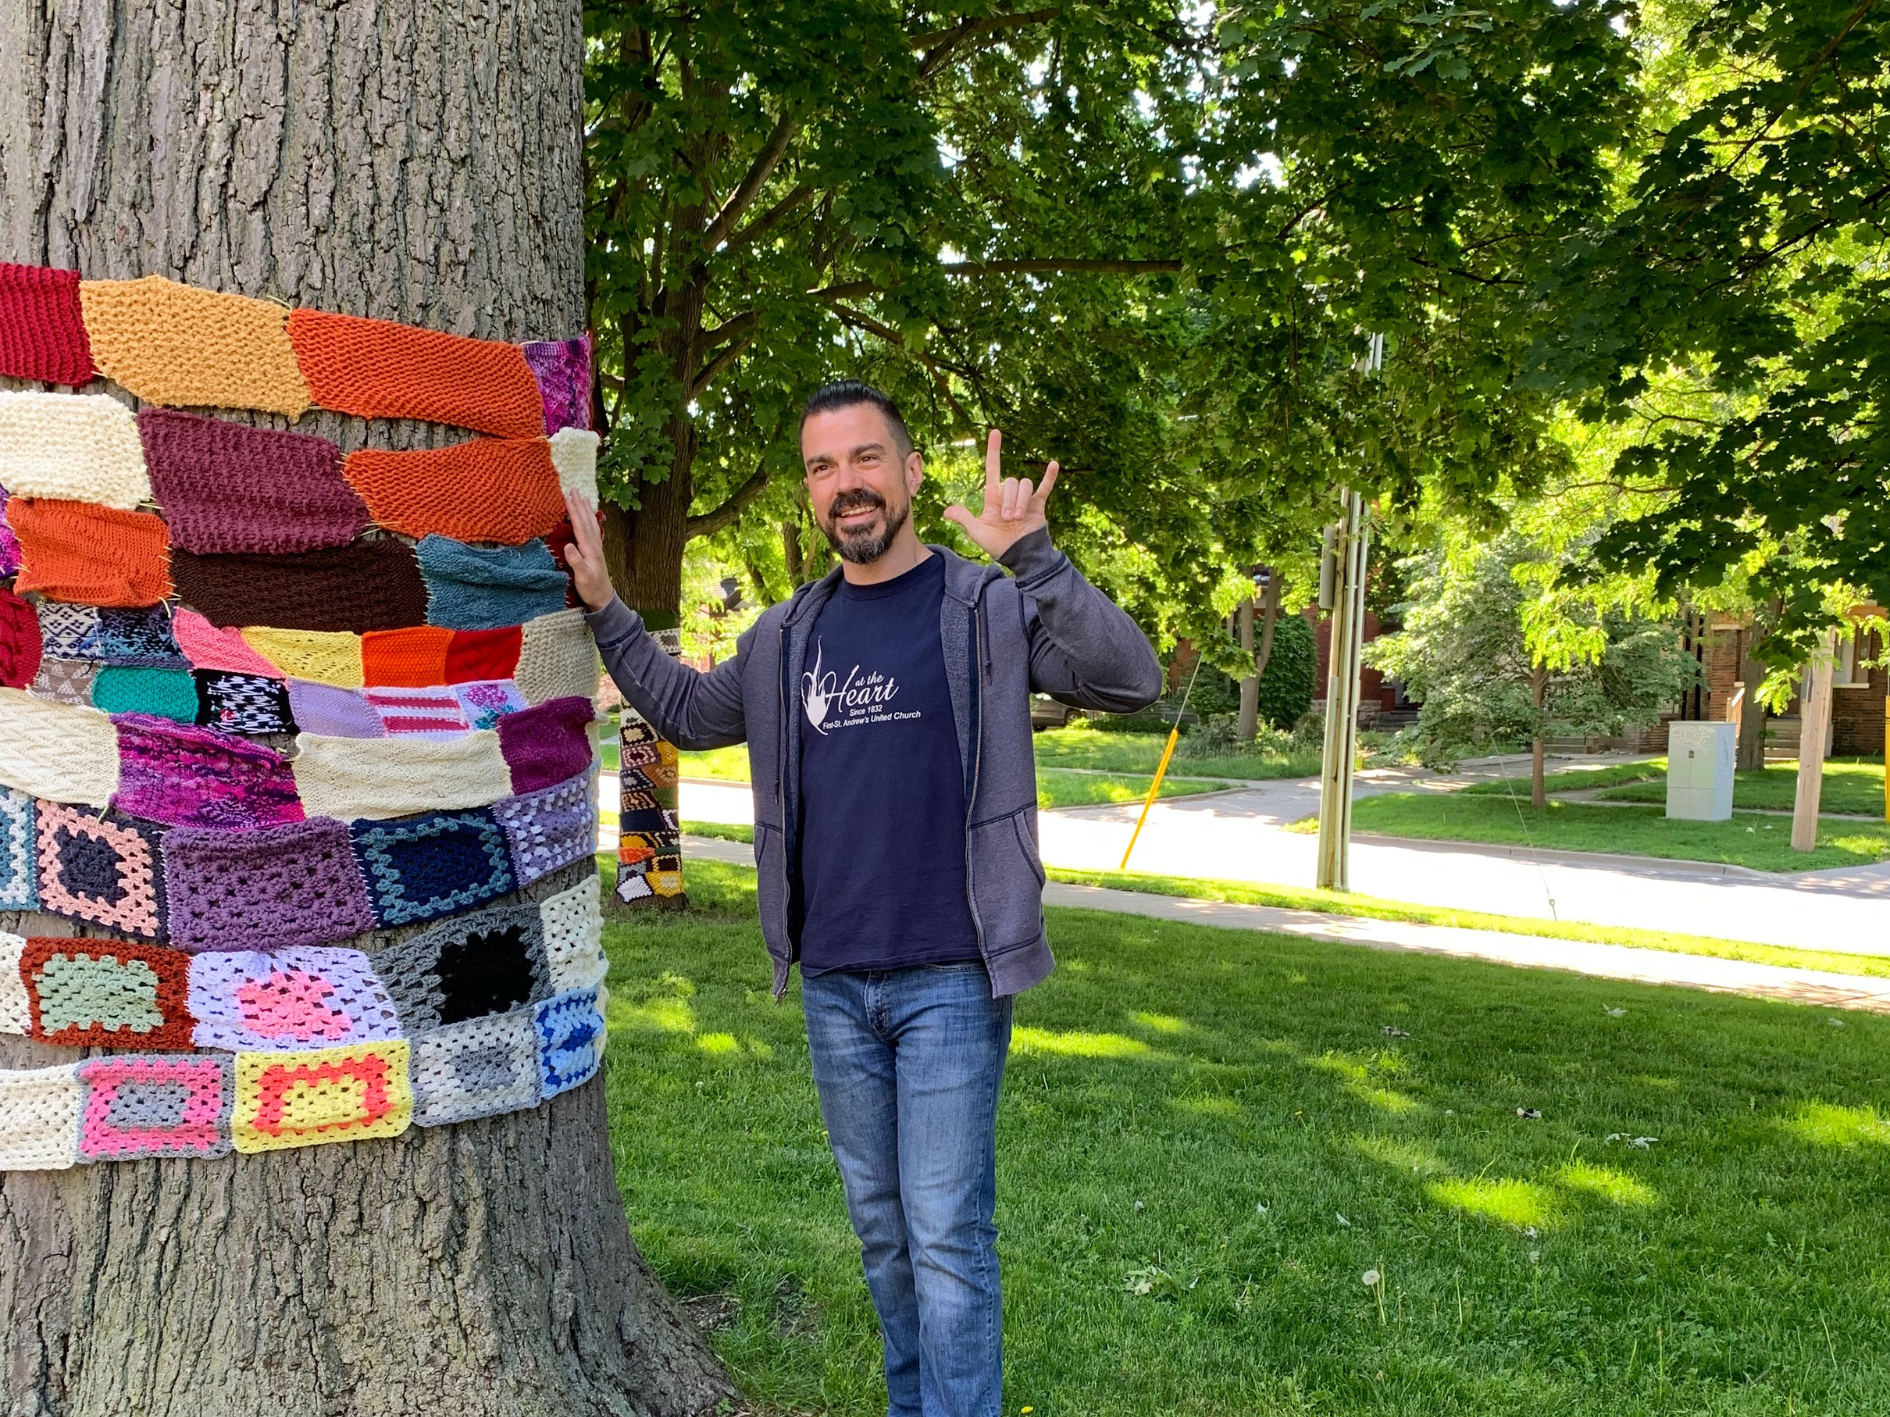 A DBCS staff member displays the sign in ASL for I love you while standing beside a tree that has been yarn bombed